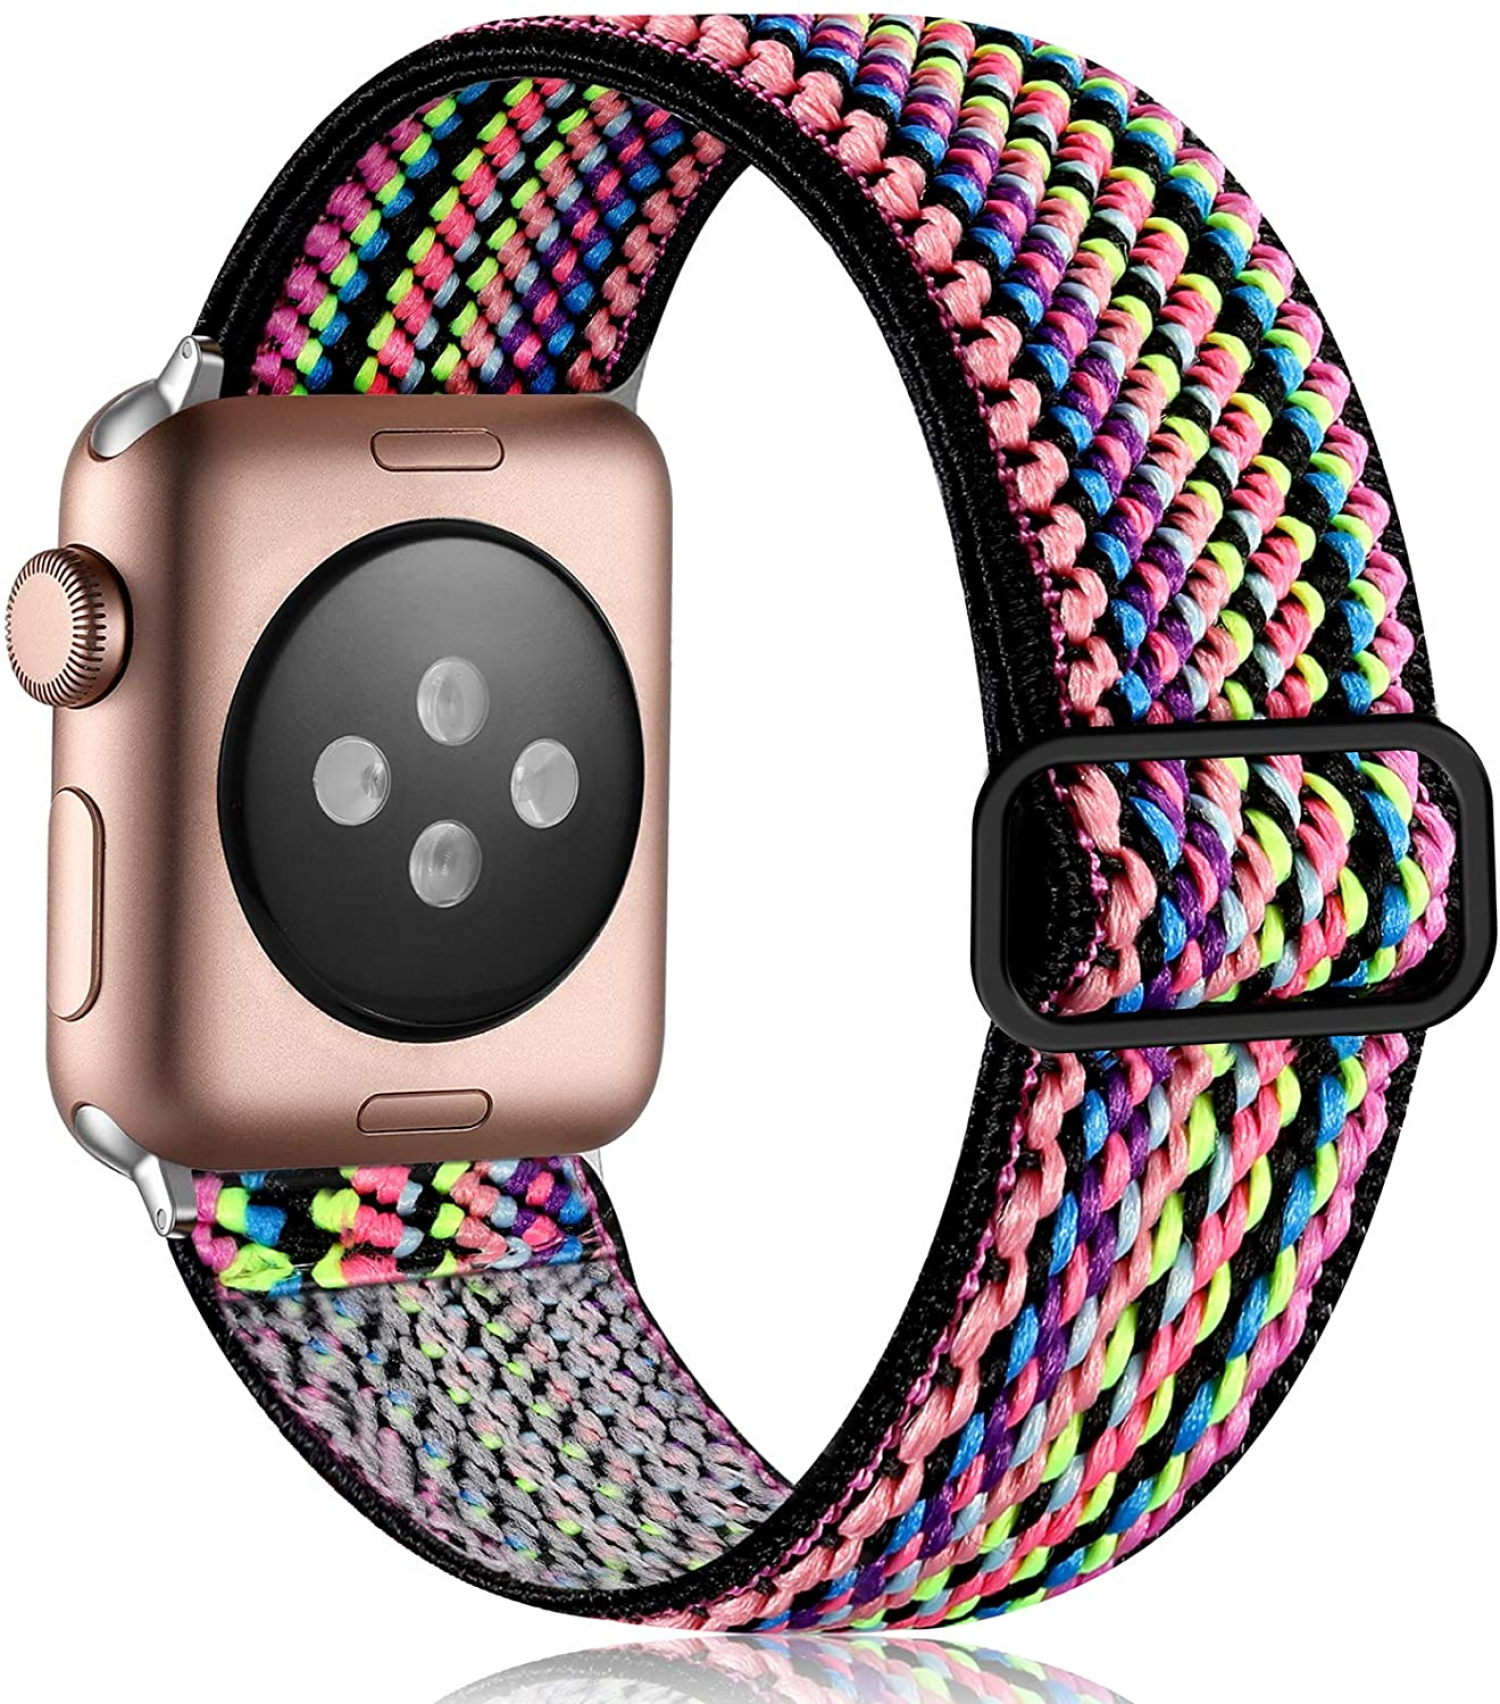 Wish Stretchy Band Compatible for Apple Watch 45mm 44mm 42mm for Women Girls, Adjust Sport Elastic Nylon Replacement Wristband for iWatch SE 5 4 3 2 1, Colorful Stripe S2365 - Walmart.com